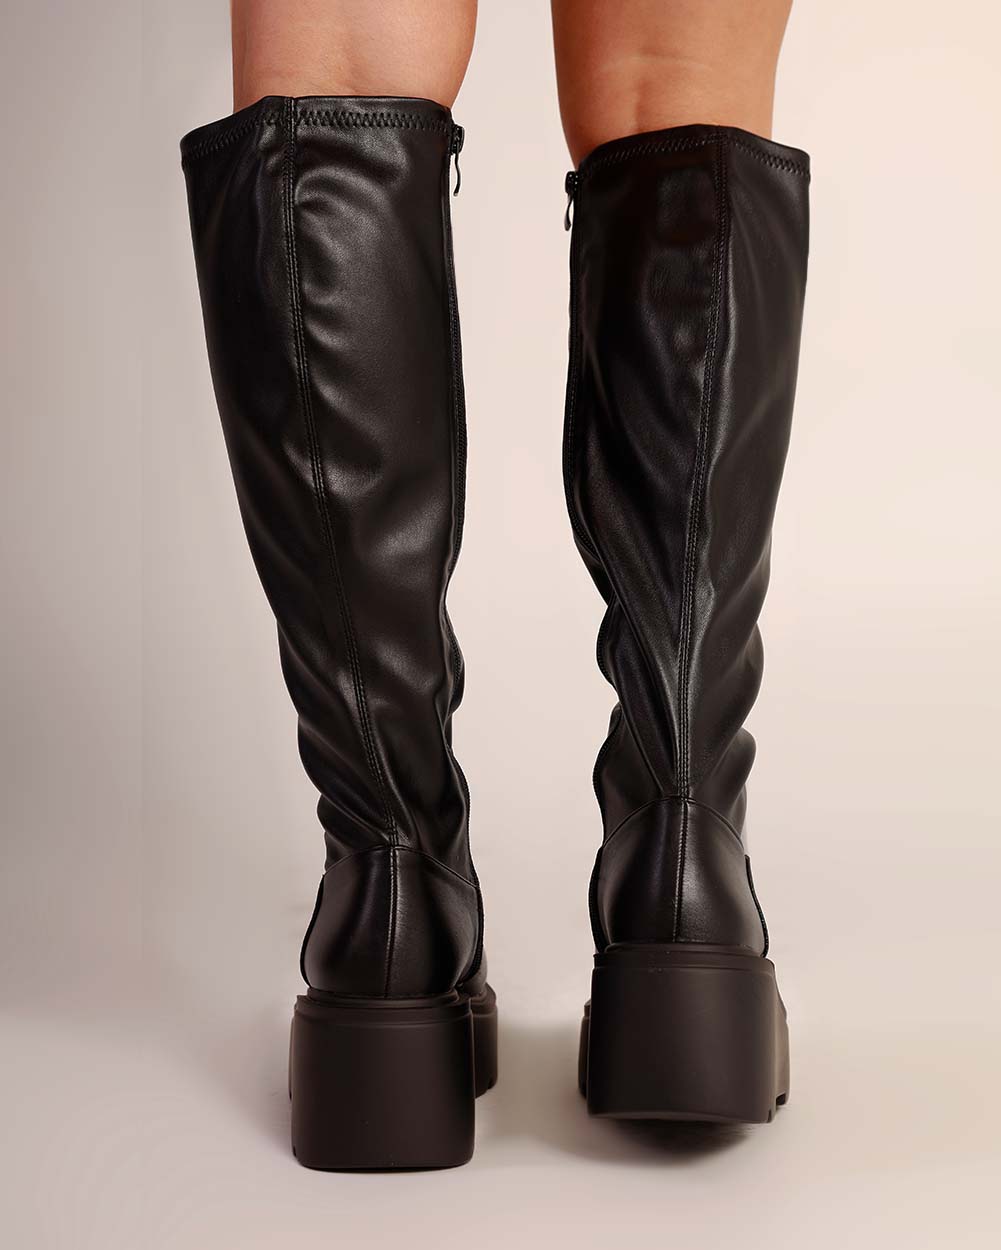 Bad Decisions Knee-High Zip Up Boots-Black-Back